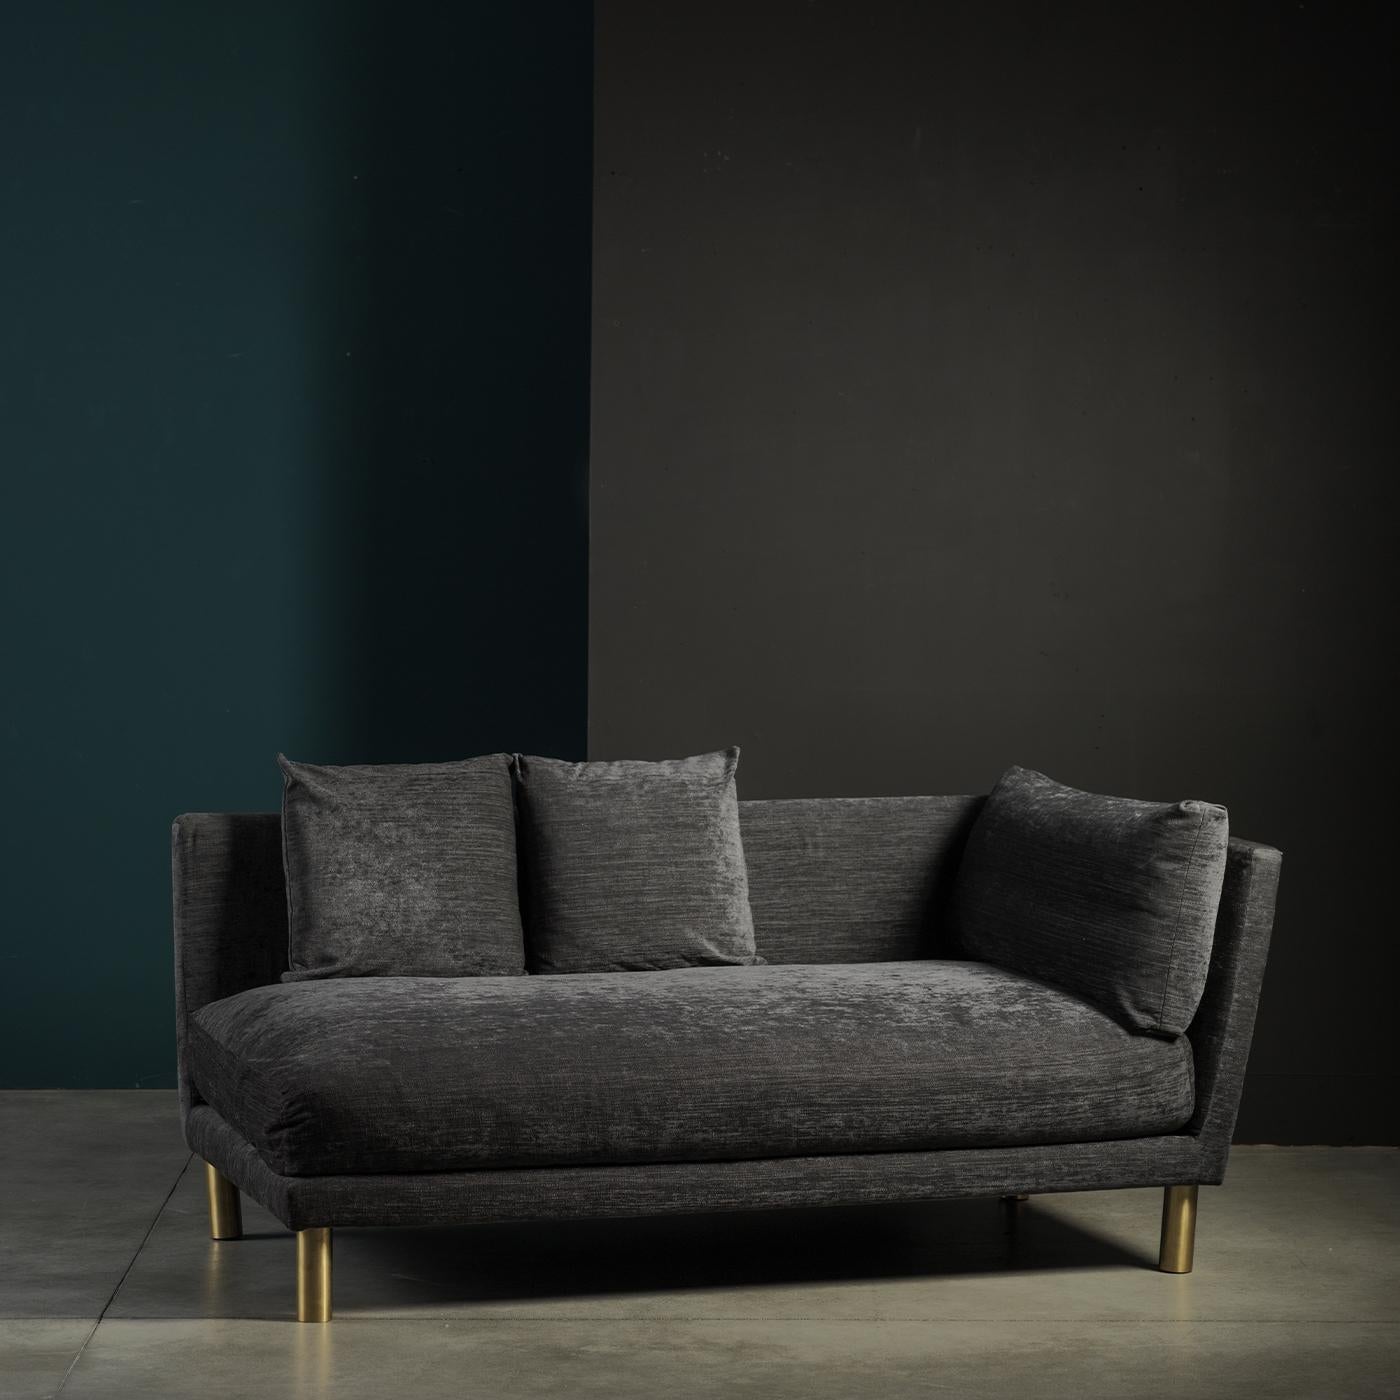 This comfortable, stylish chaise lounge makes a striking addition to any environment. It stands upon satin brass feet and is covered in soft, gray fabric. Its one-armed look is sleek and sophisticated, allowing it to blend in and stand out. Chelini